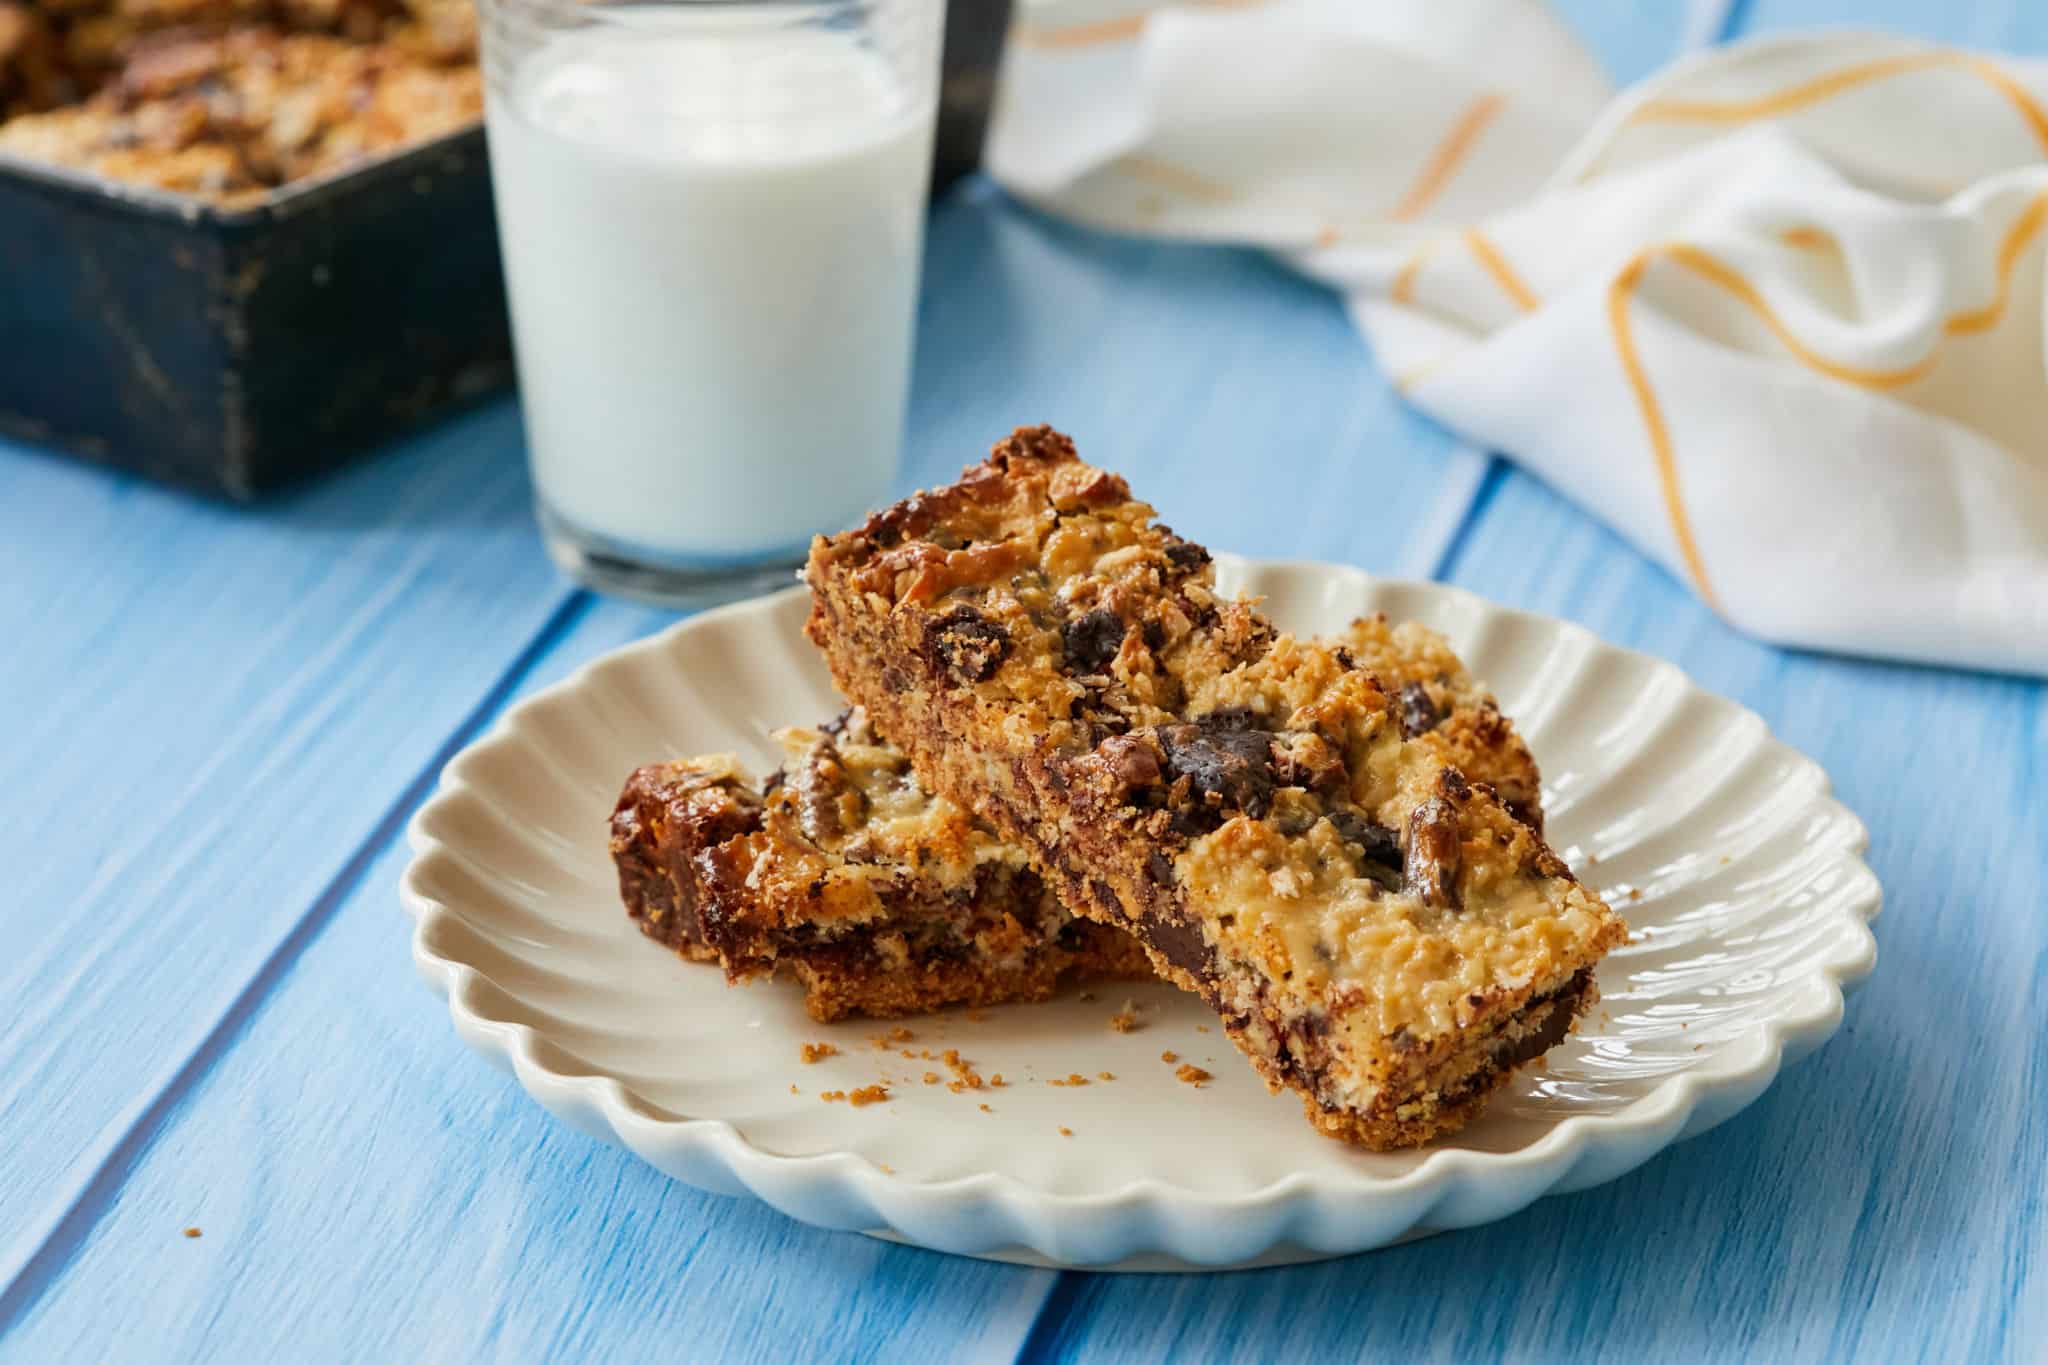 Three homemade Magic Bars are served on a white plate next to a glass of milk. The Magic Bars show a layers of graham cracker crust, shredded coconut, toasted pecans, and chocolate.